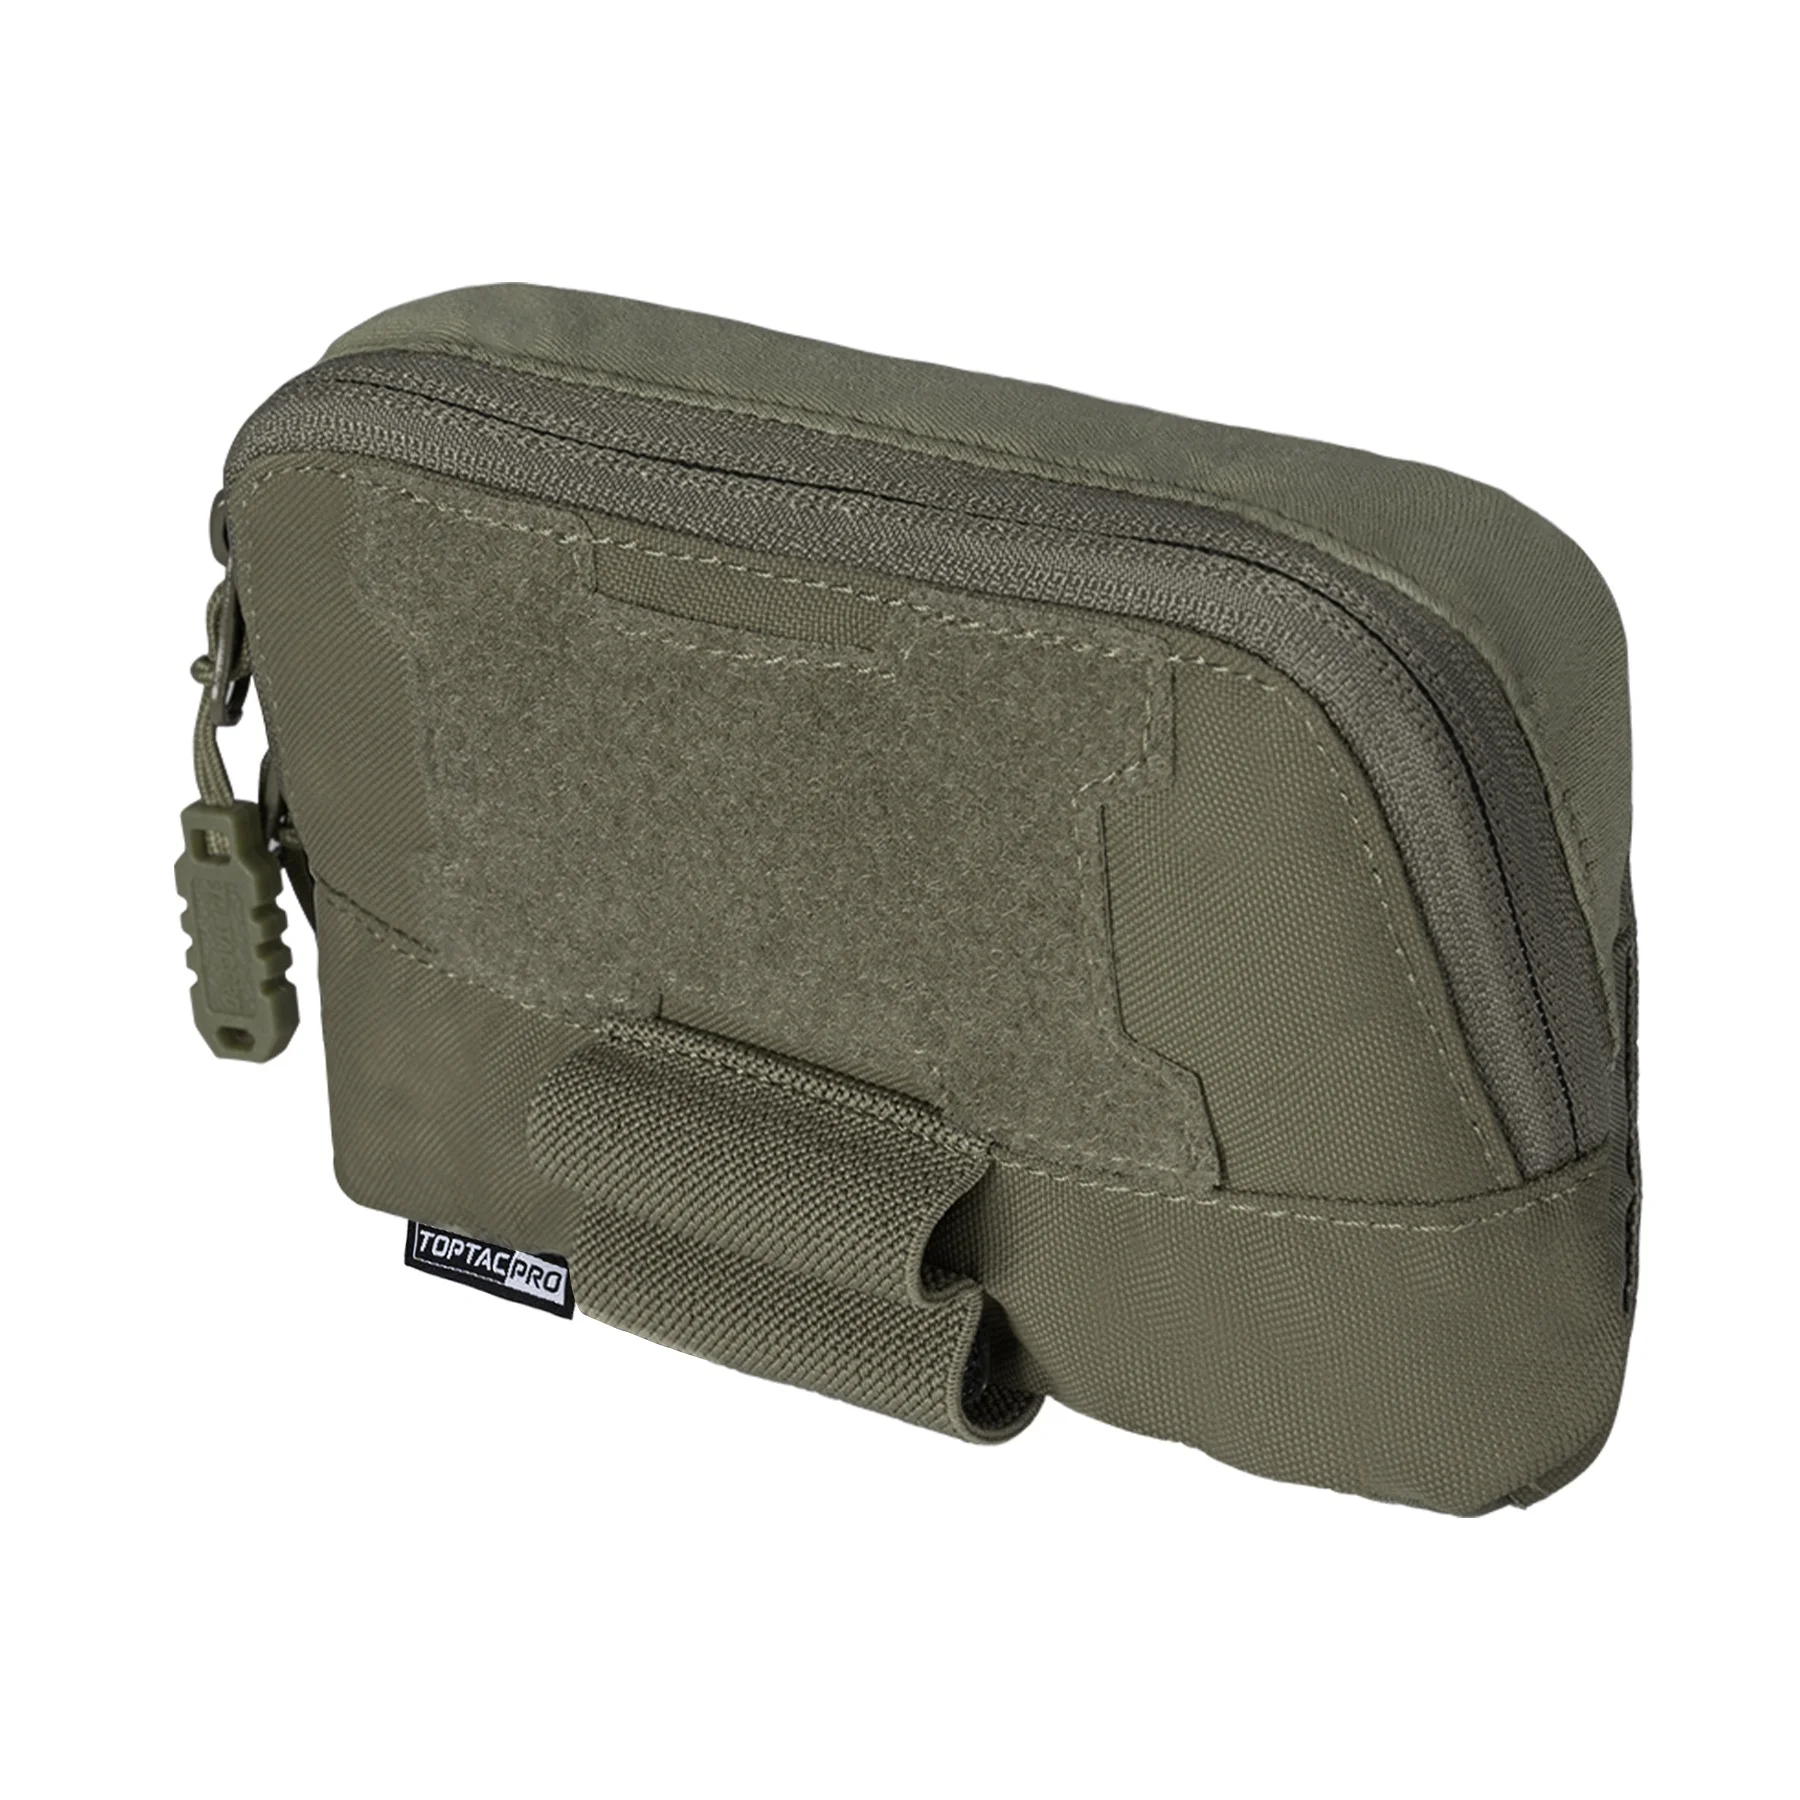 

TOPTACPRO Tactical Admin Pouch Panel Sundry EDC Accessory Pouch Chest Storage Carrier MOLLE Utility Pouch